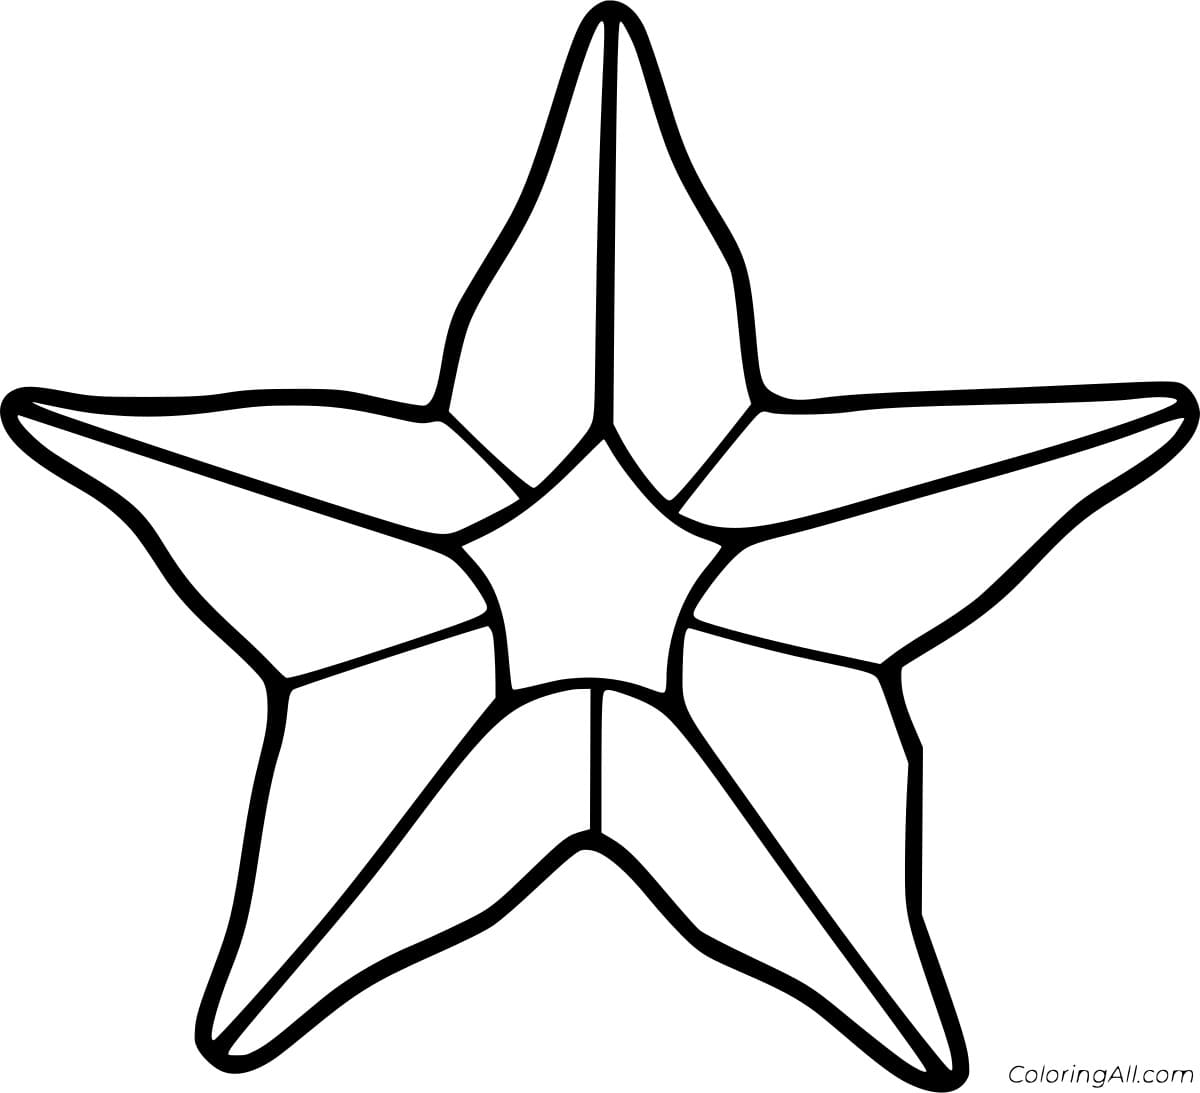 Simple Beautiful Starfish Coloring Page